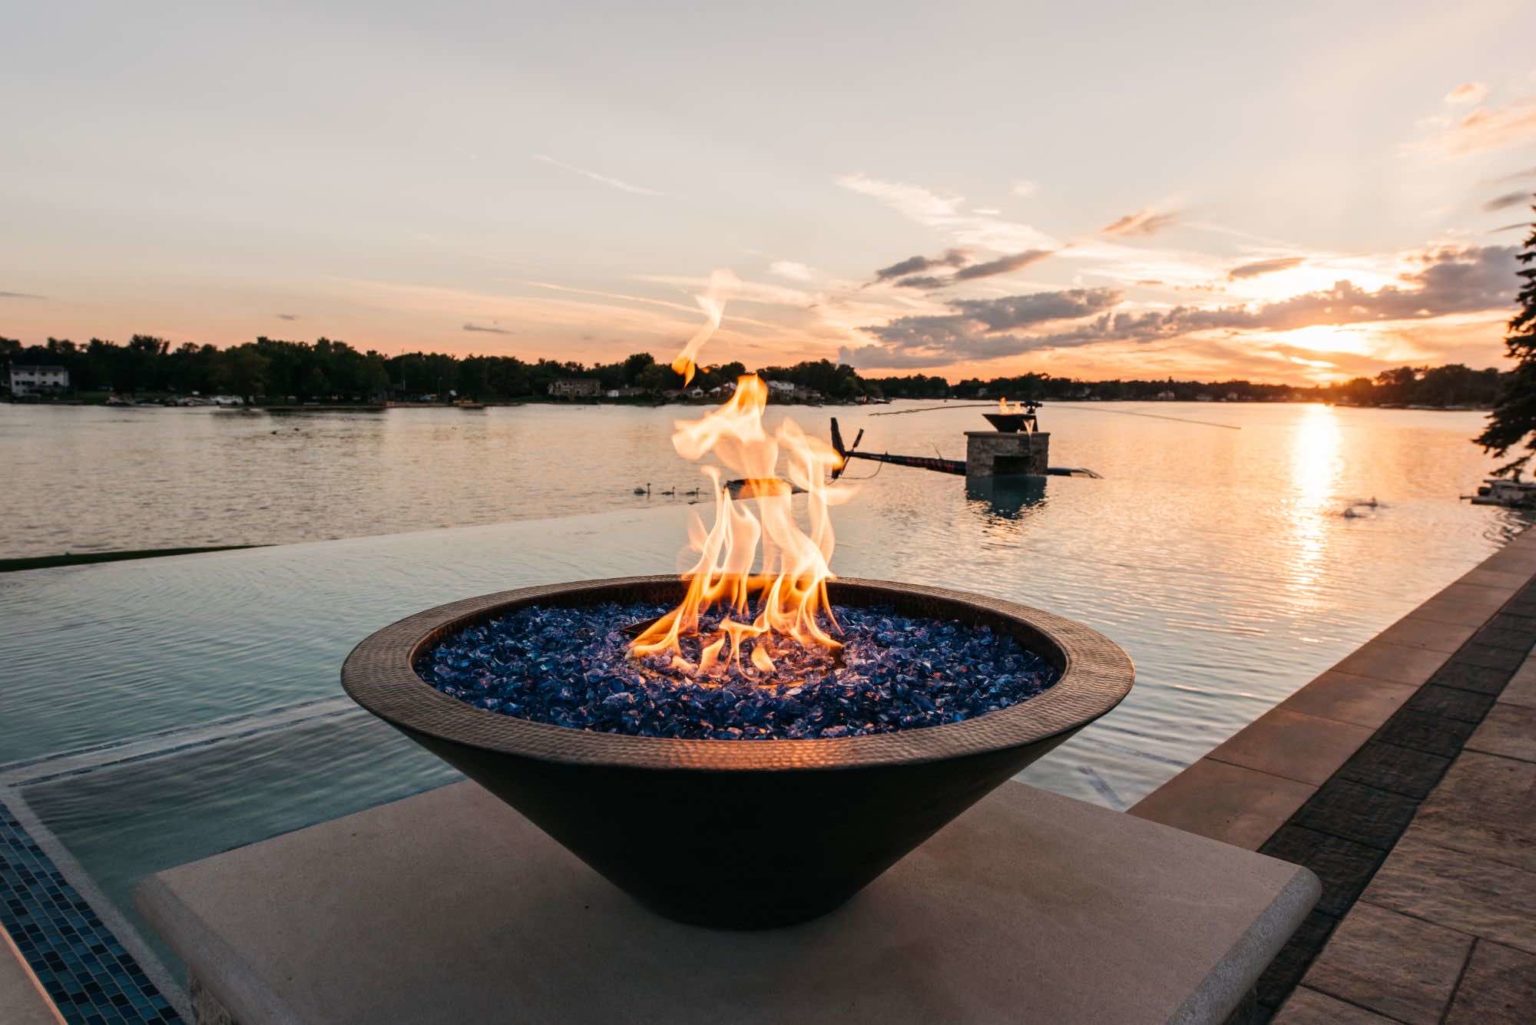 Outdoor Fire Features Fire Pit Designs Fire Feature Ideas Gas Fire Pits Outdoor Fireplaces Fire Pit Installation Custom Fire Features Backyard Fire Features